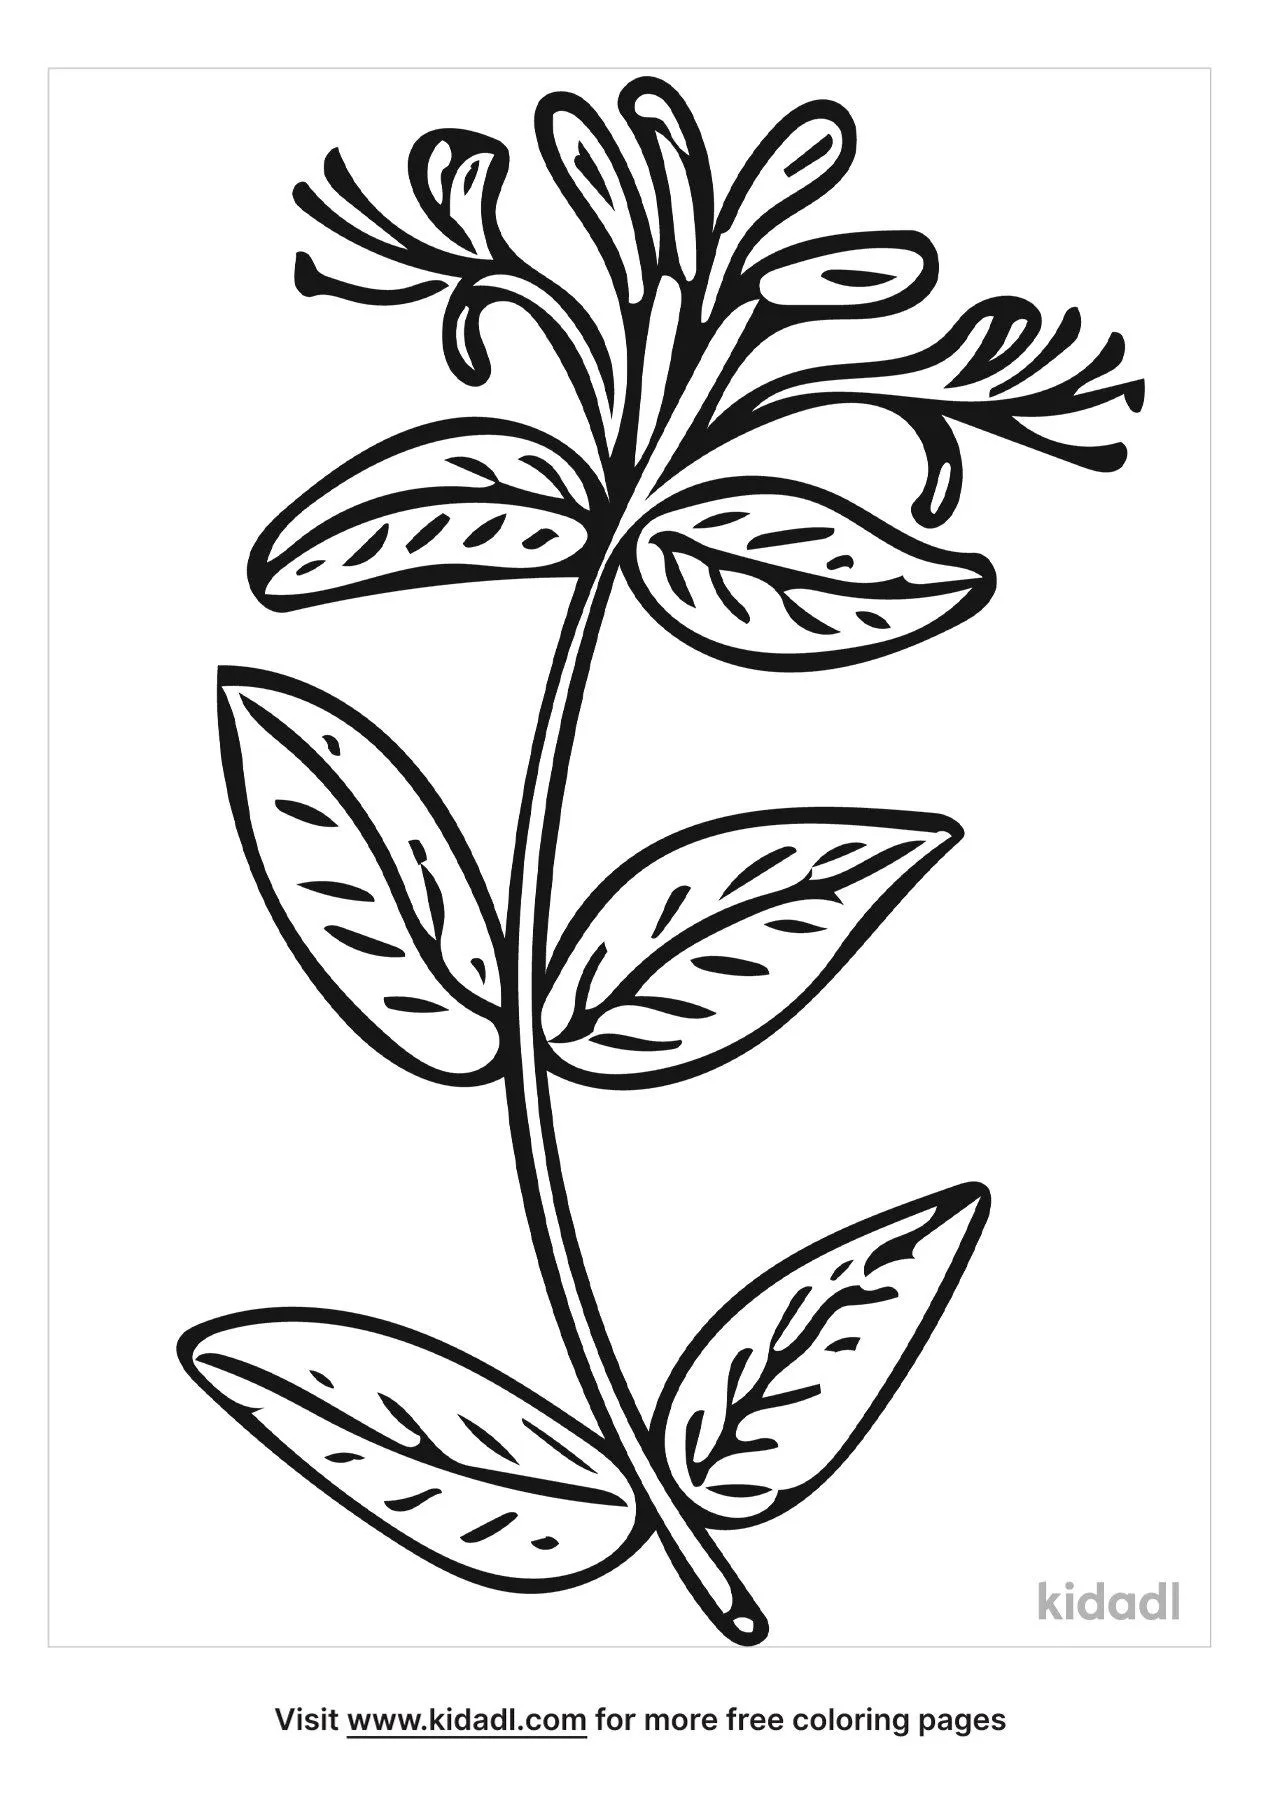 Honeysuckle Rose Coloring Page